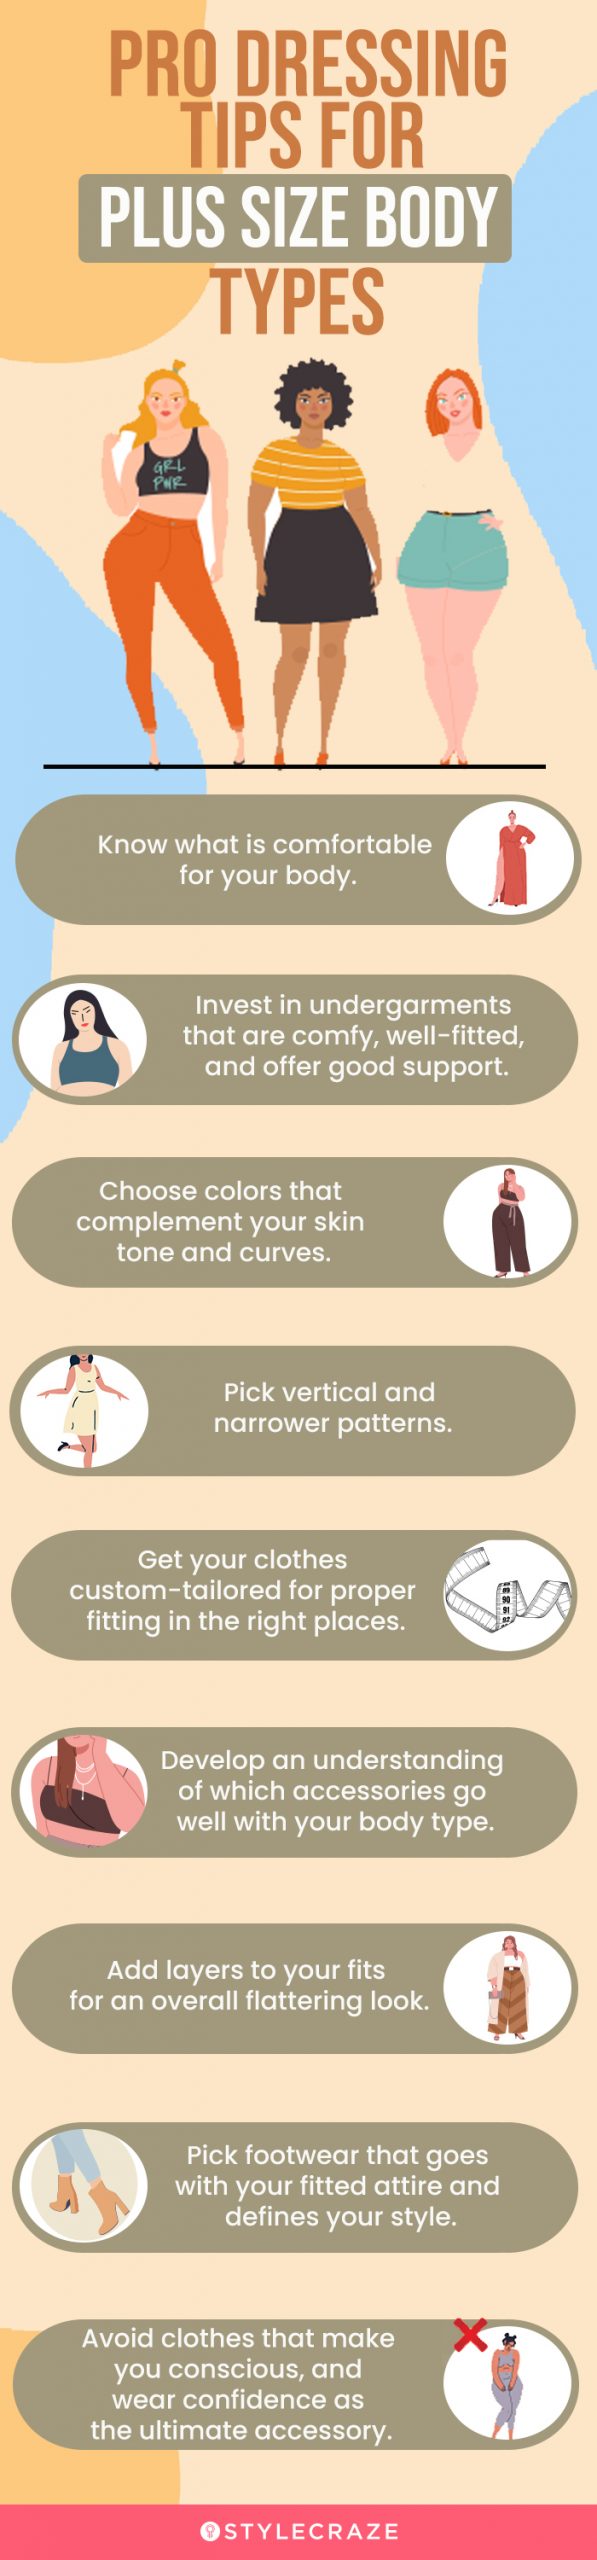 pro dressing tips for plus size body types [infographic]